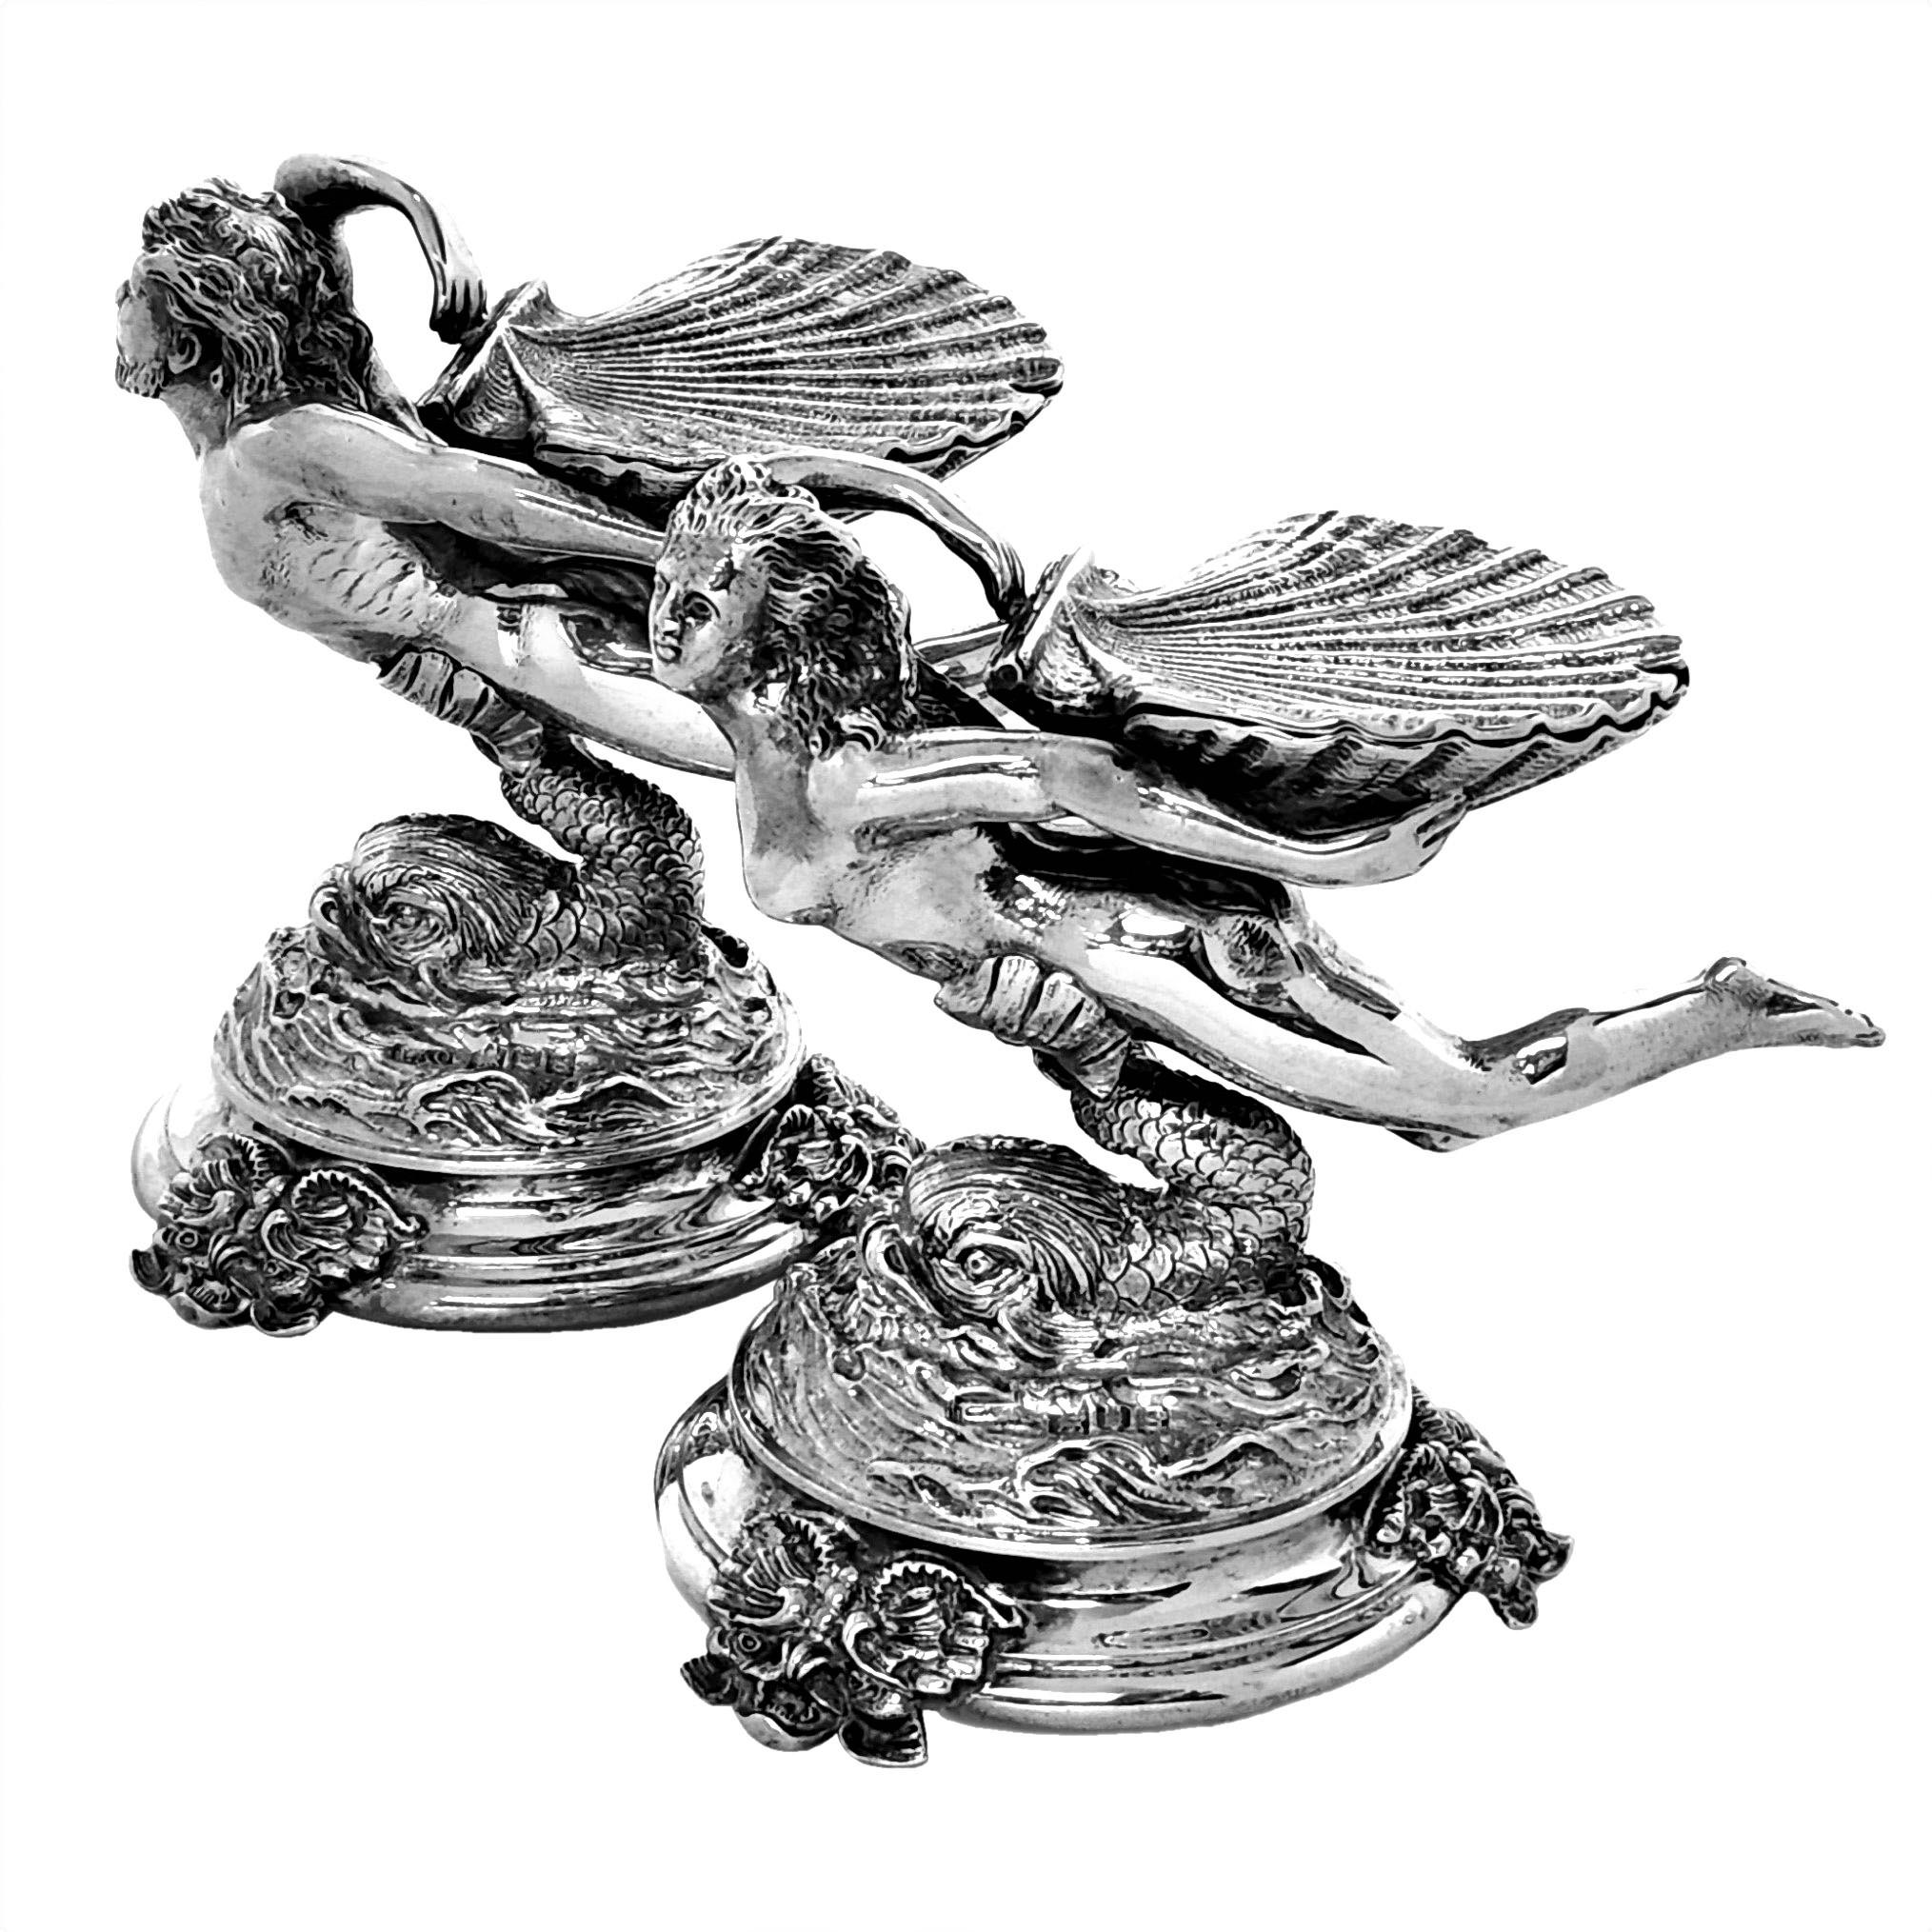 A pair of magnificent Antique solid Silver Salts showing a classical figure supported by a medieval style dolphin on a spread foot. One figure is female and one male and each holds a large lidded shell.

Made in London, England in 1913 by L A